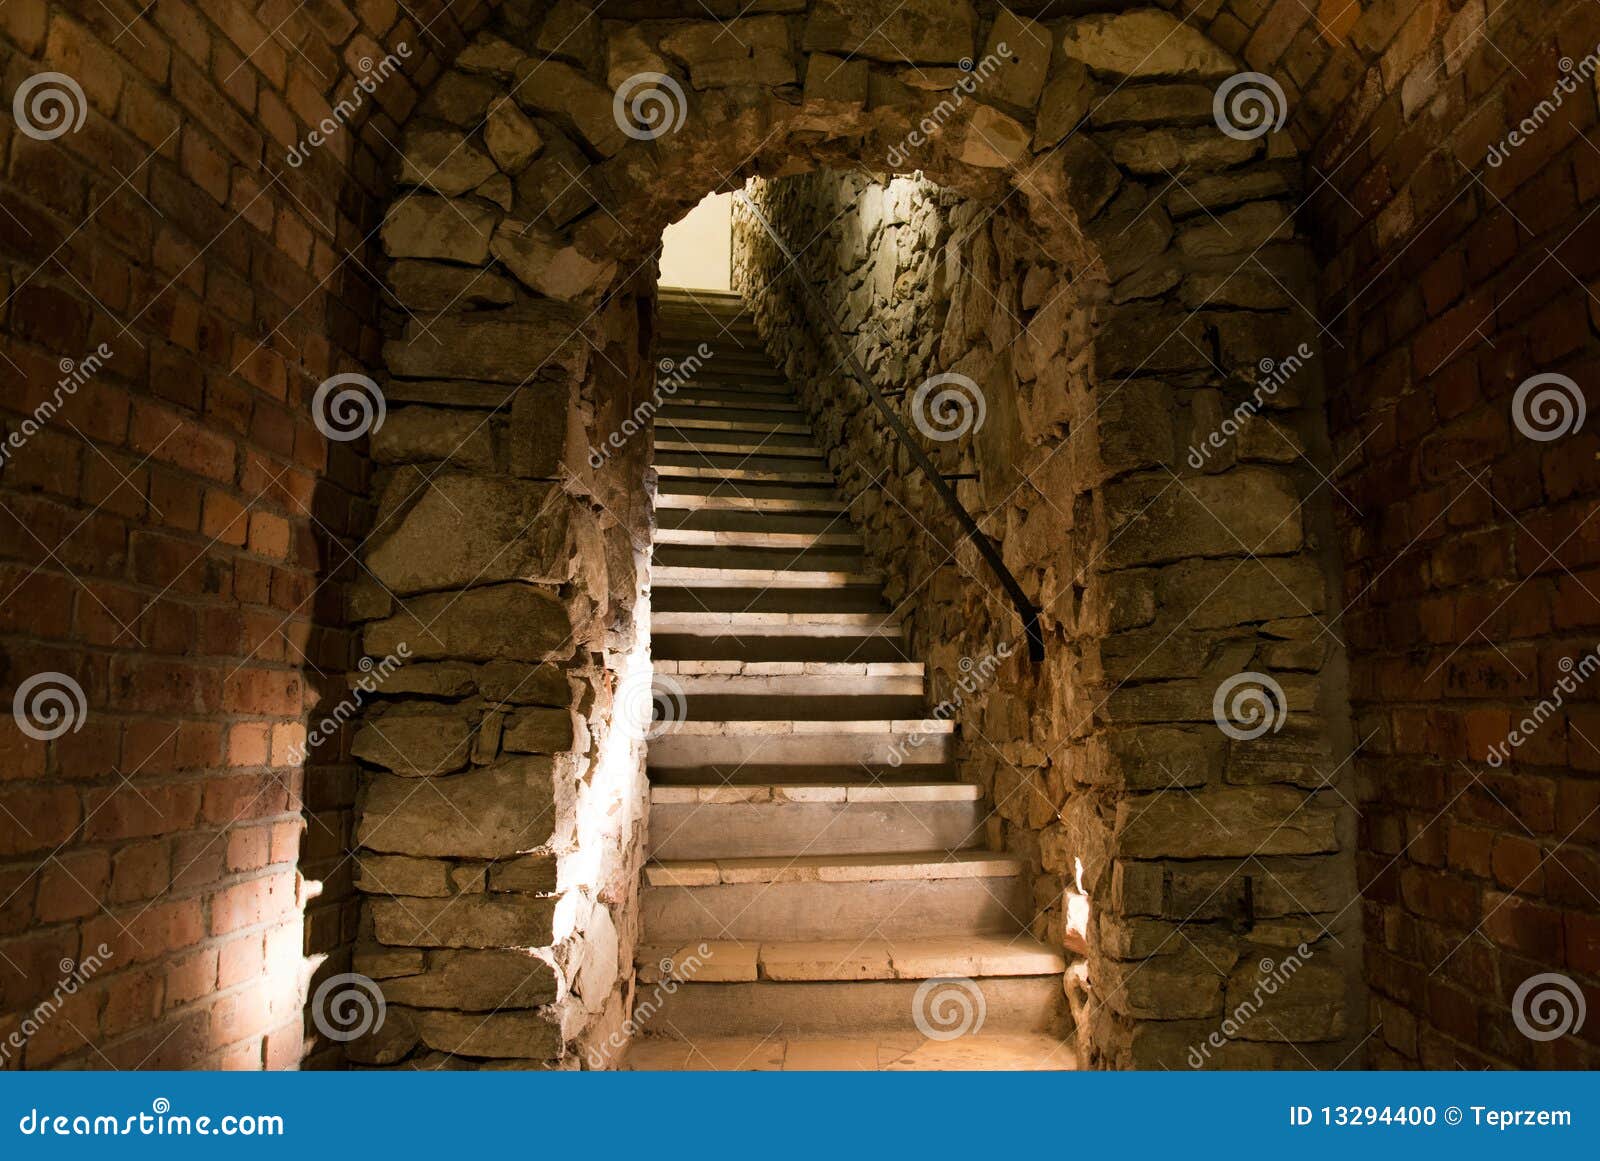 medieval tunnel with stairs